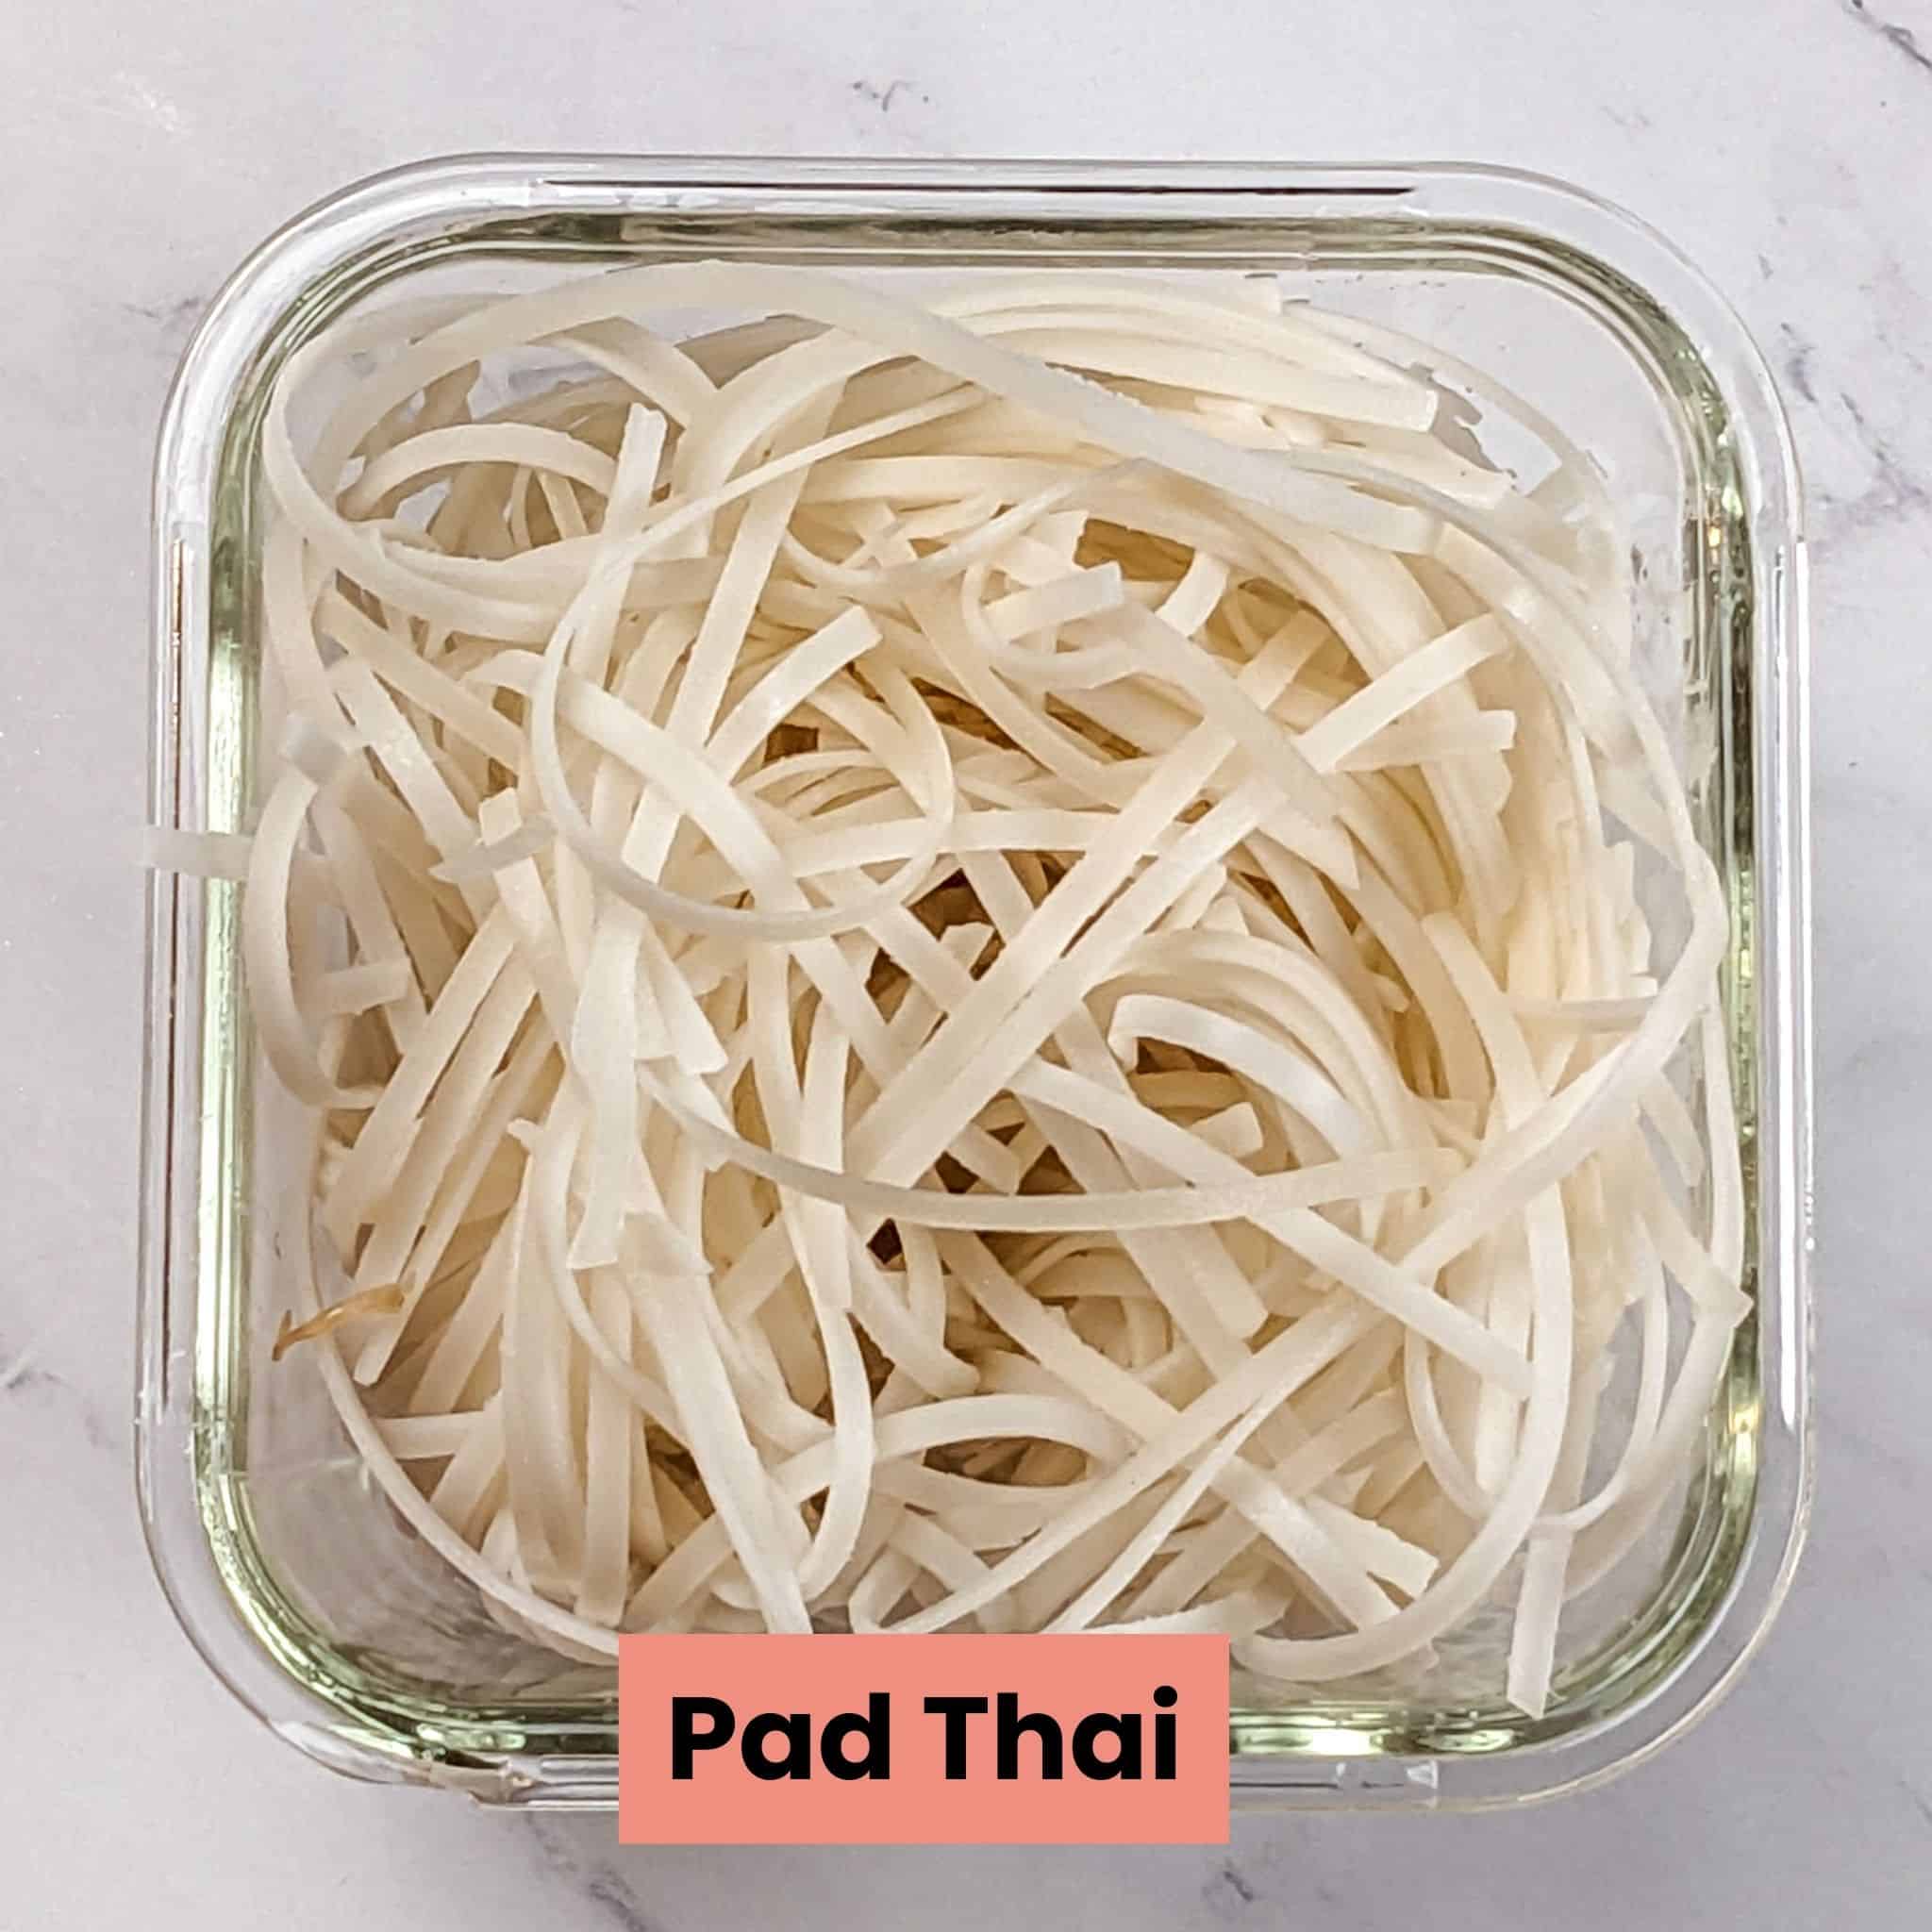 soaked and drained pad thai noodles in a deep square glass container.